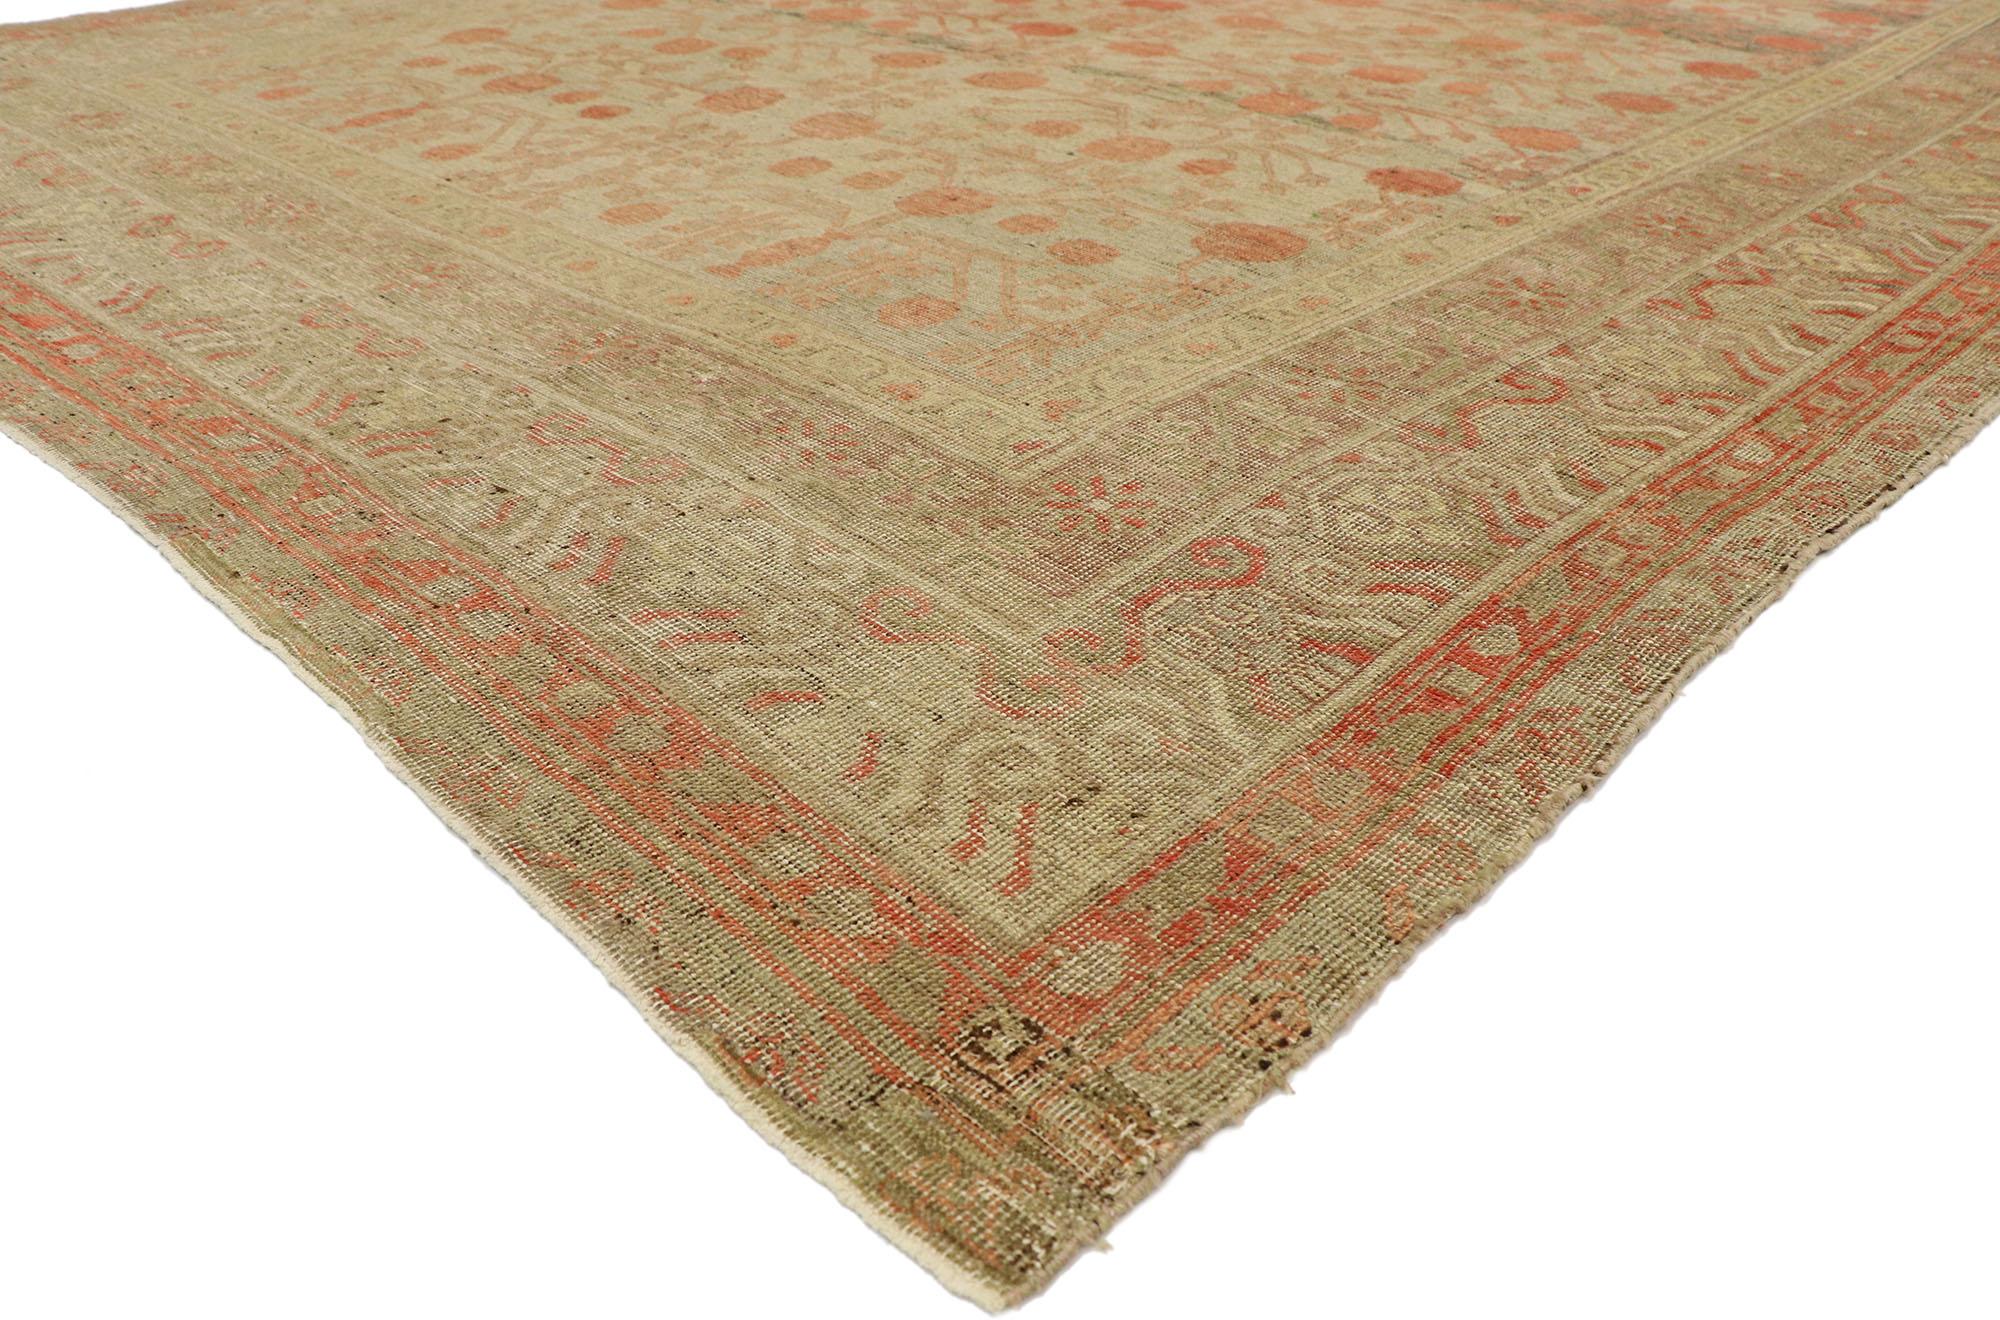 74841, distressed antique Khotan Gallery rug with Pomegranate design. With its striking appeal and architectural elements of naturalistic forms, this hand knotted wool distressed antique Khotan rug can beautifully blend modern, traditional, and